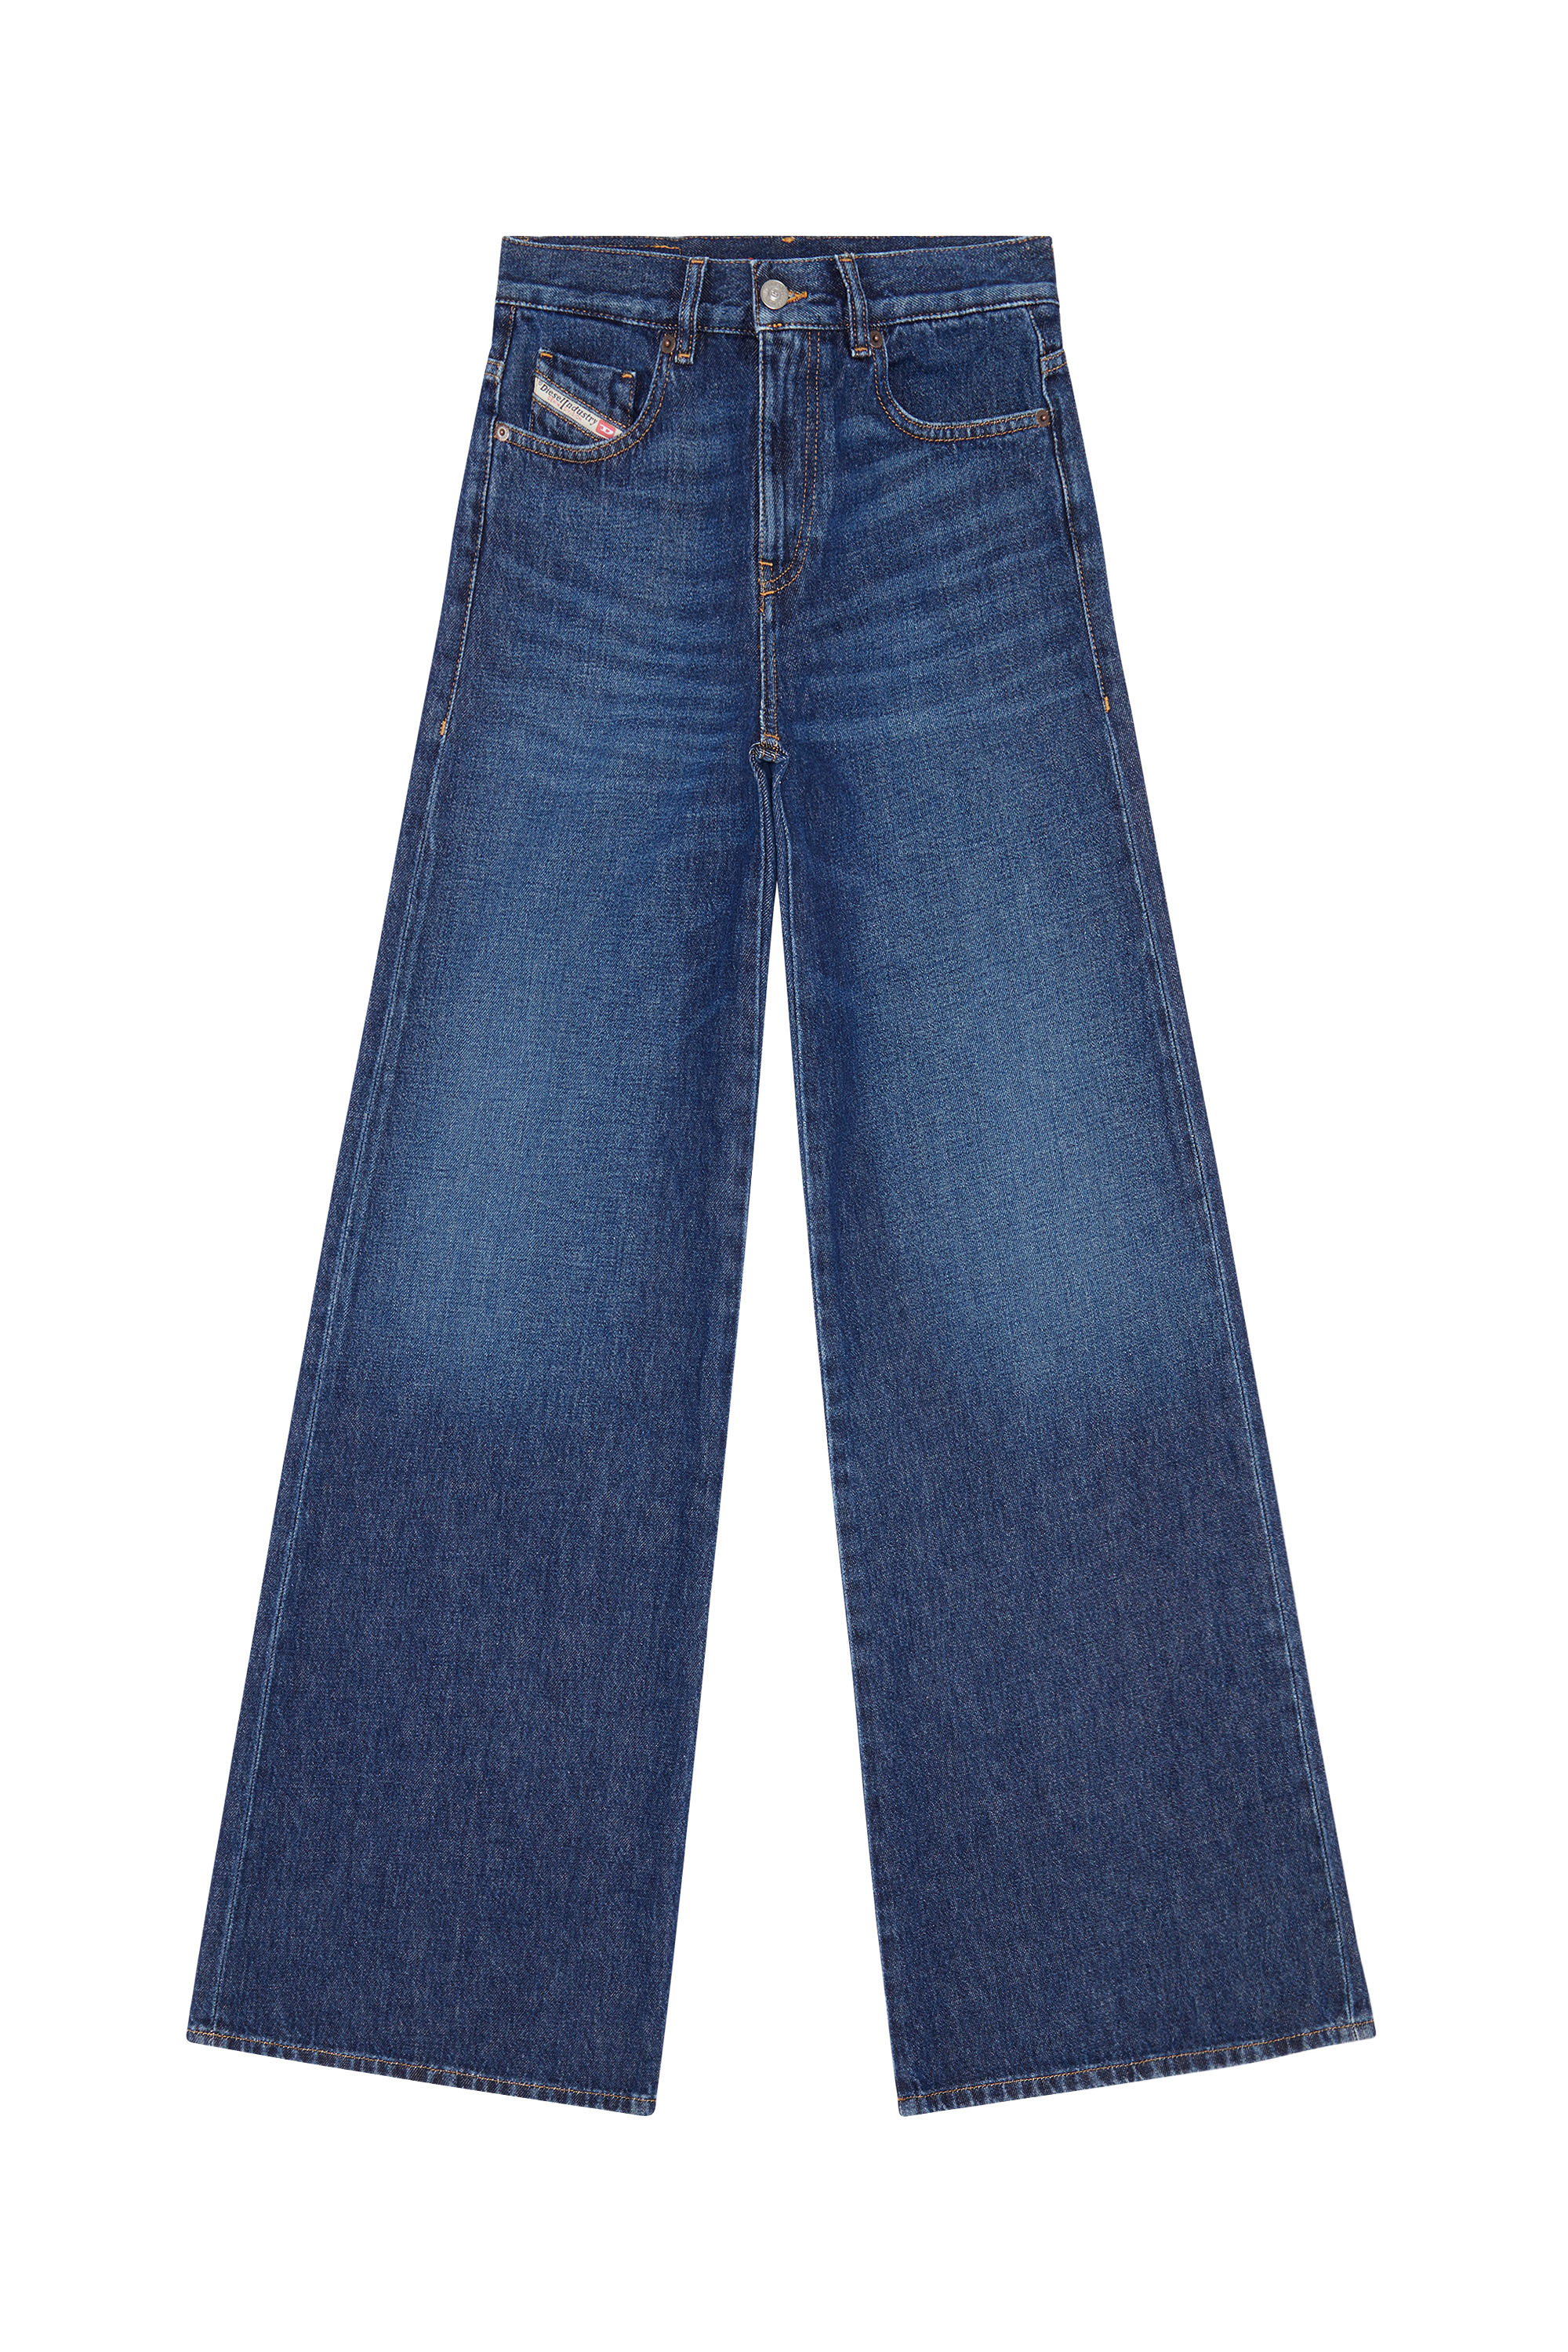 1978 D-Akemi 09C03 Bootcut and Flare Jeans, Dunkelblau - Jeans